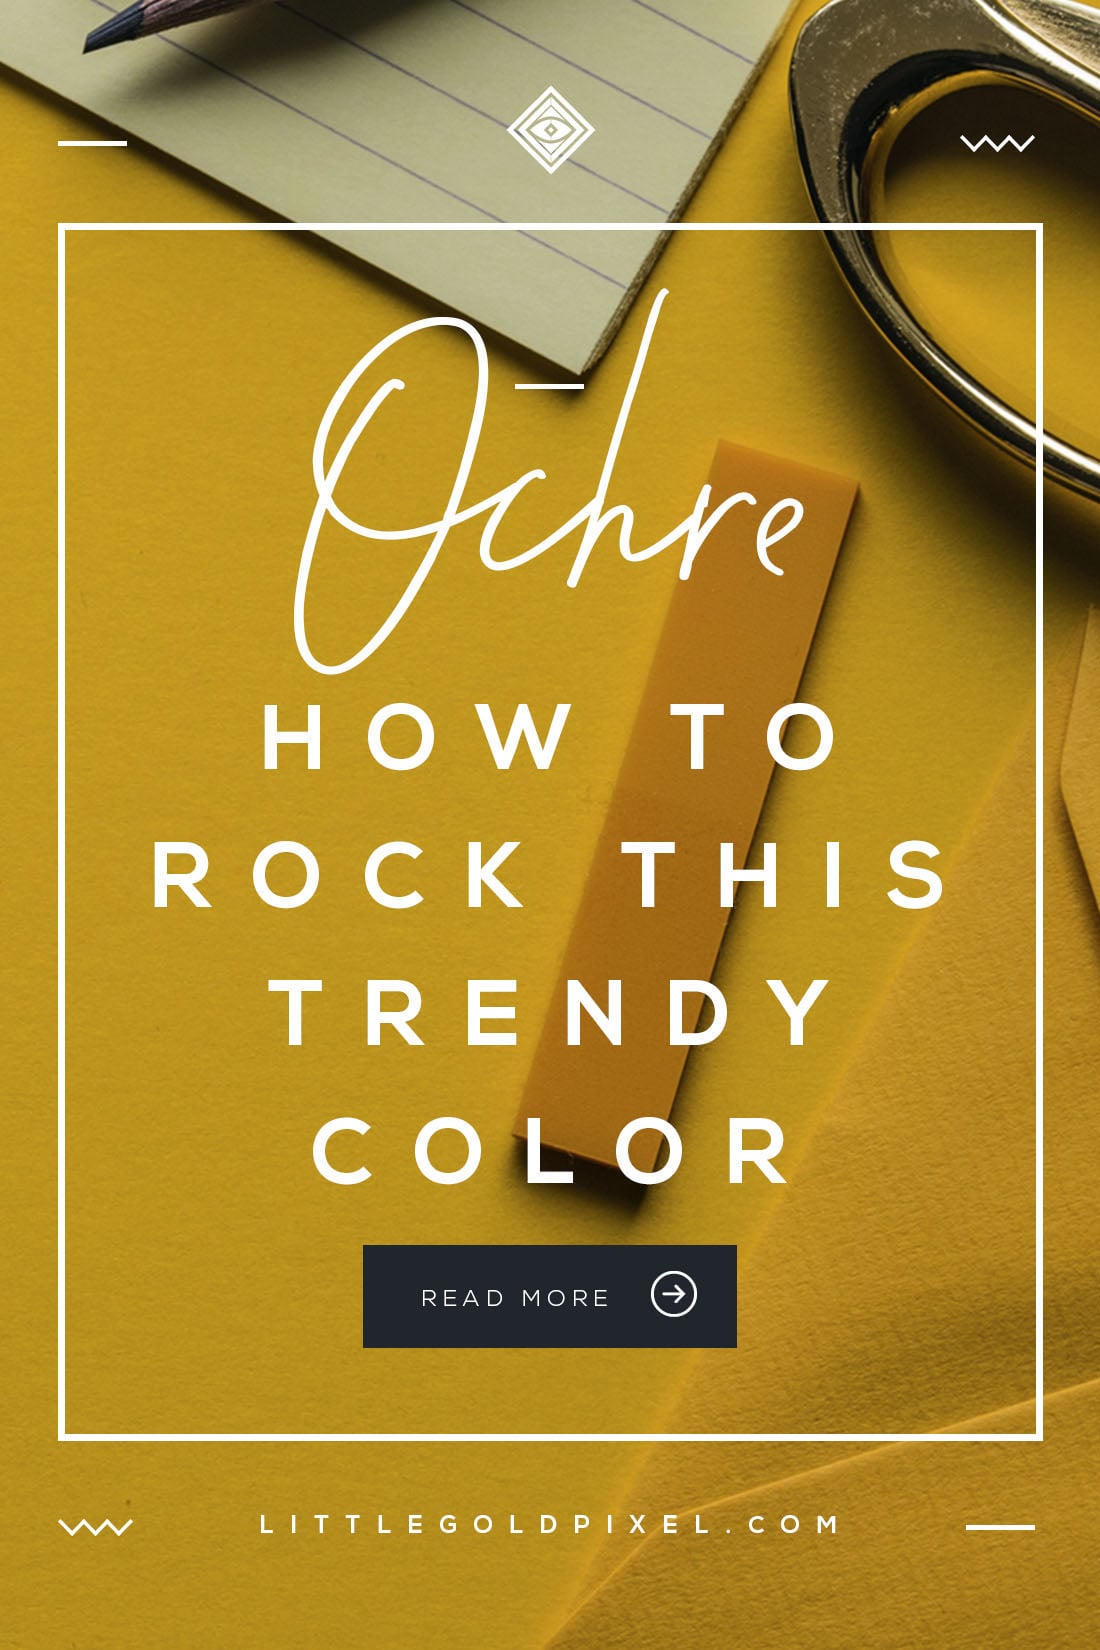 Ochre Color Trend • Little Gold Pixel • What's the deal with ochre? I dissect the color trend, give you 20 ways to rock the hue and a color palette to help you shop! #ochre #color #trend #colorpalette #mustard #yellow